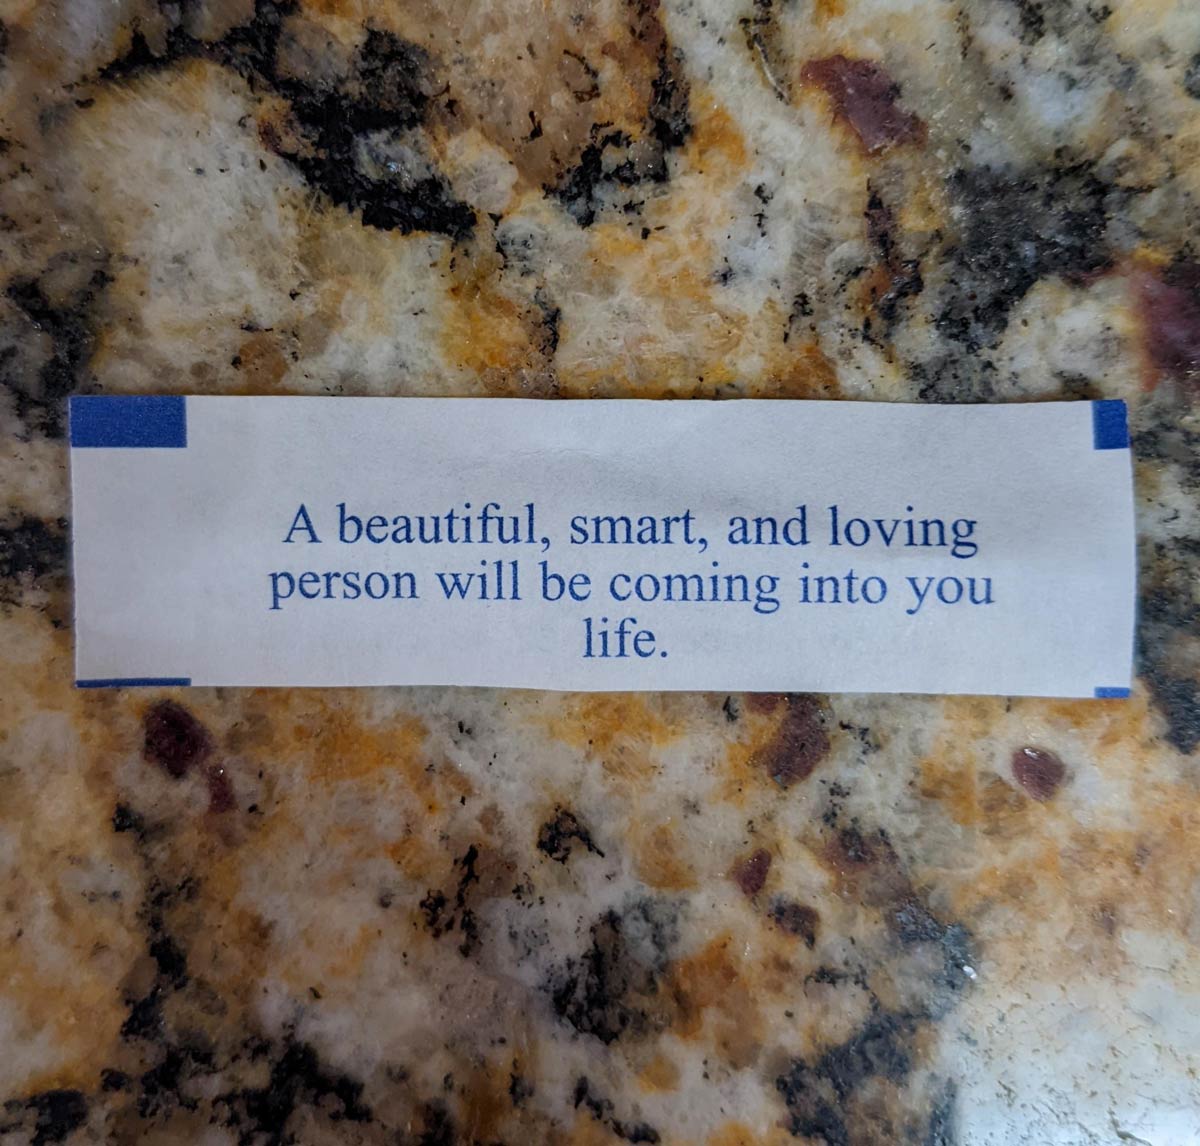 My husband's fortune